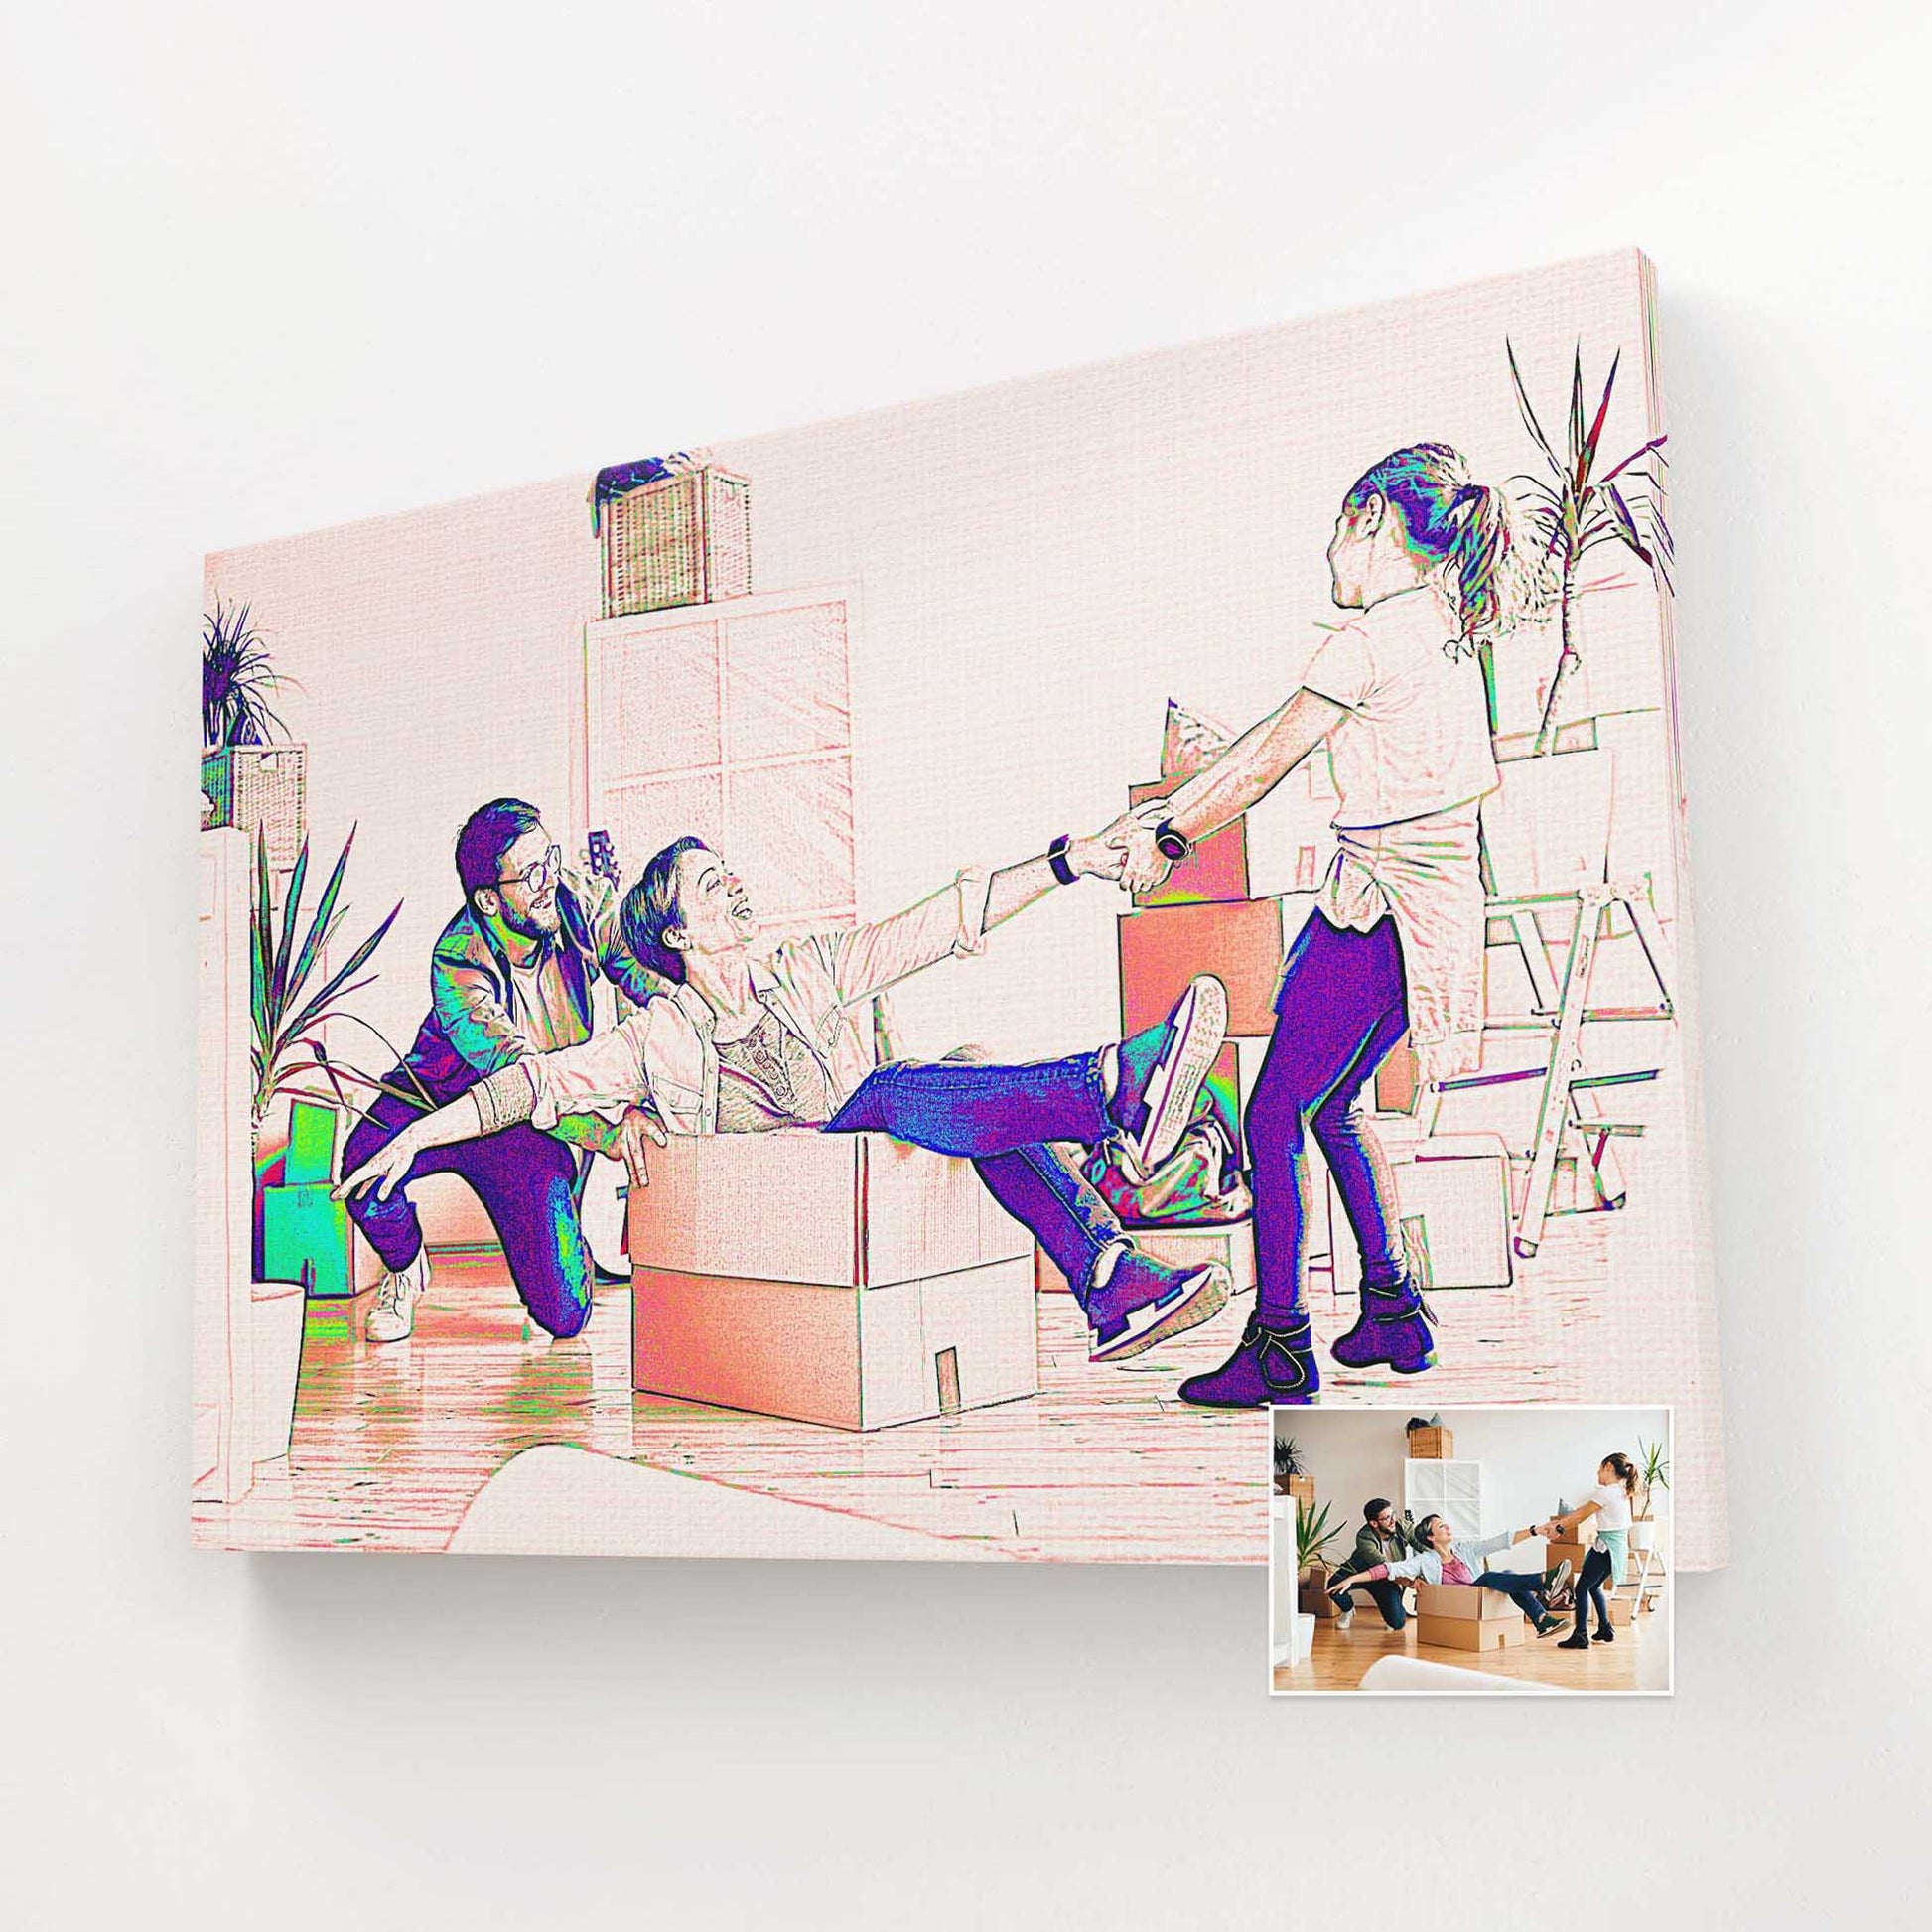 Personalised Pencil Drawing Canvas: A Colorful and Sharp Visual Delight Discover the magic of a personalized pencil drawing canvas